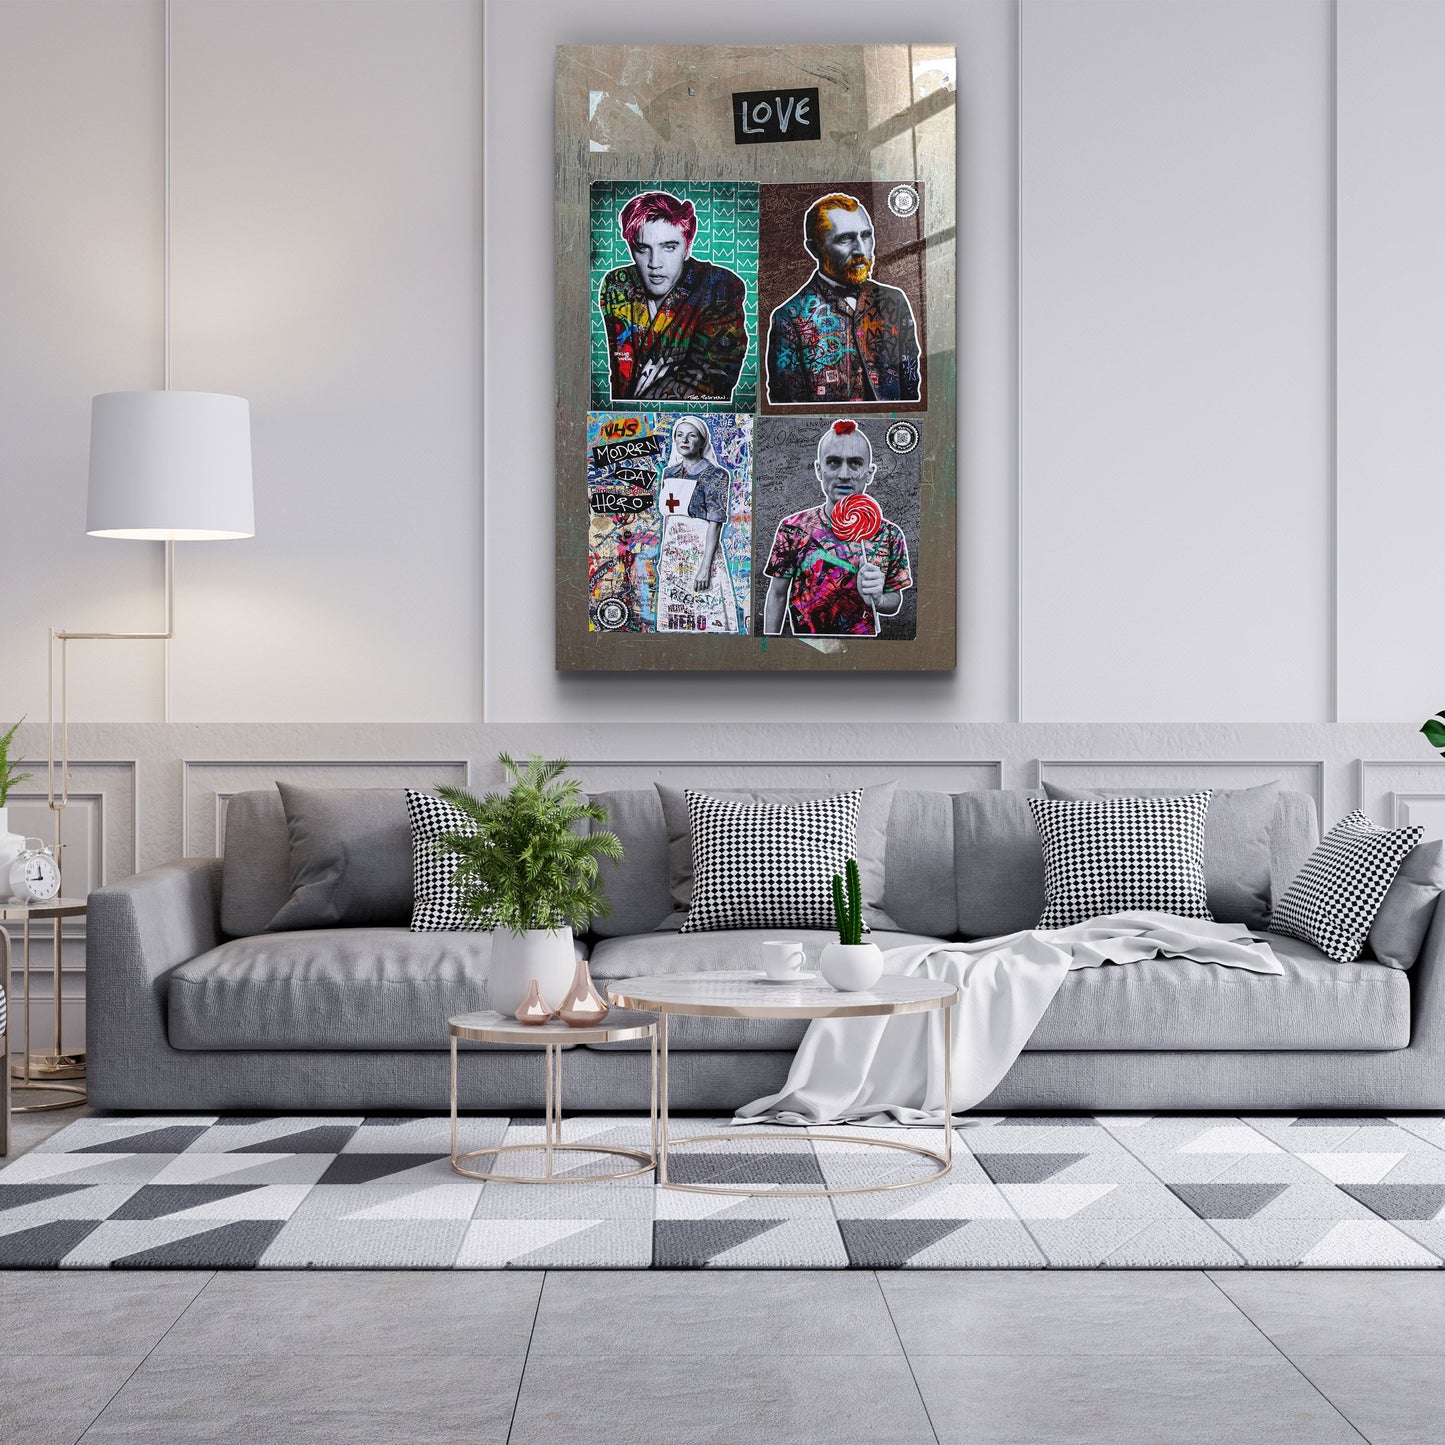 Besties for the Resties - Designer's Collection Glass Wall Art